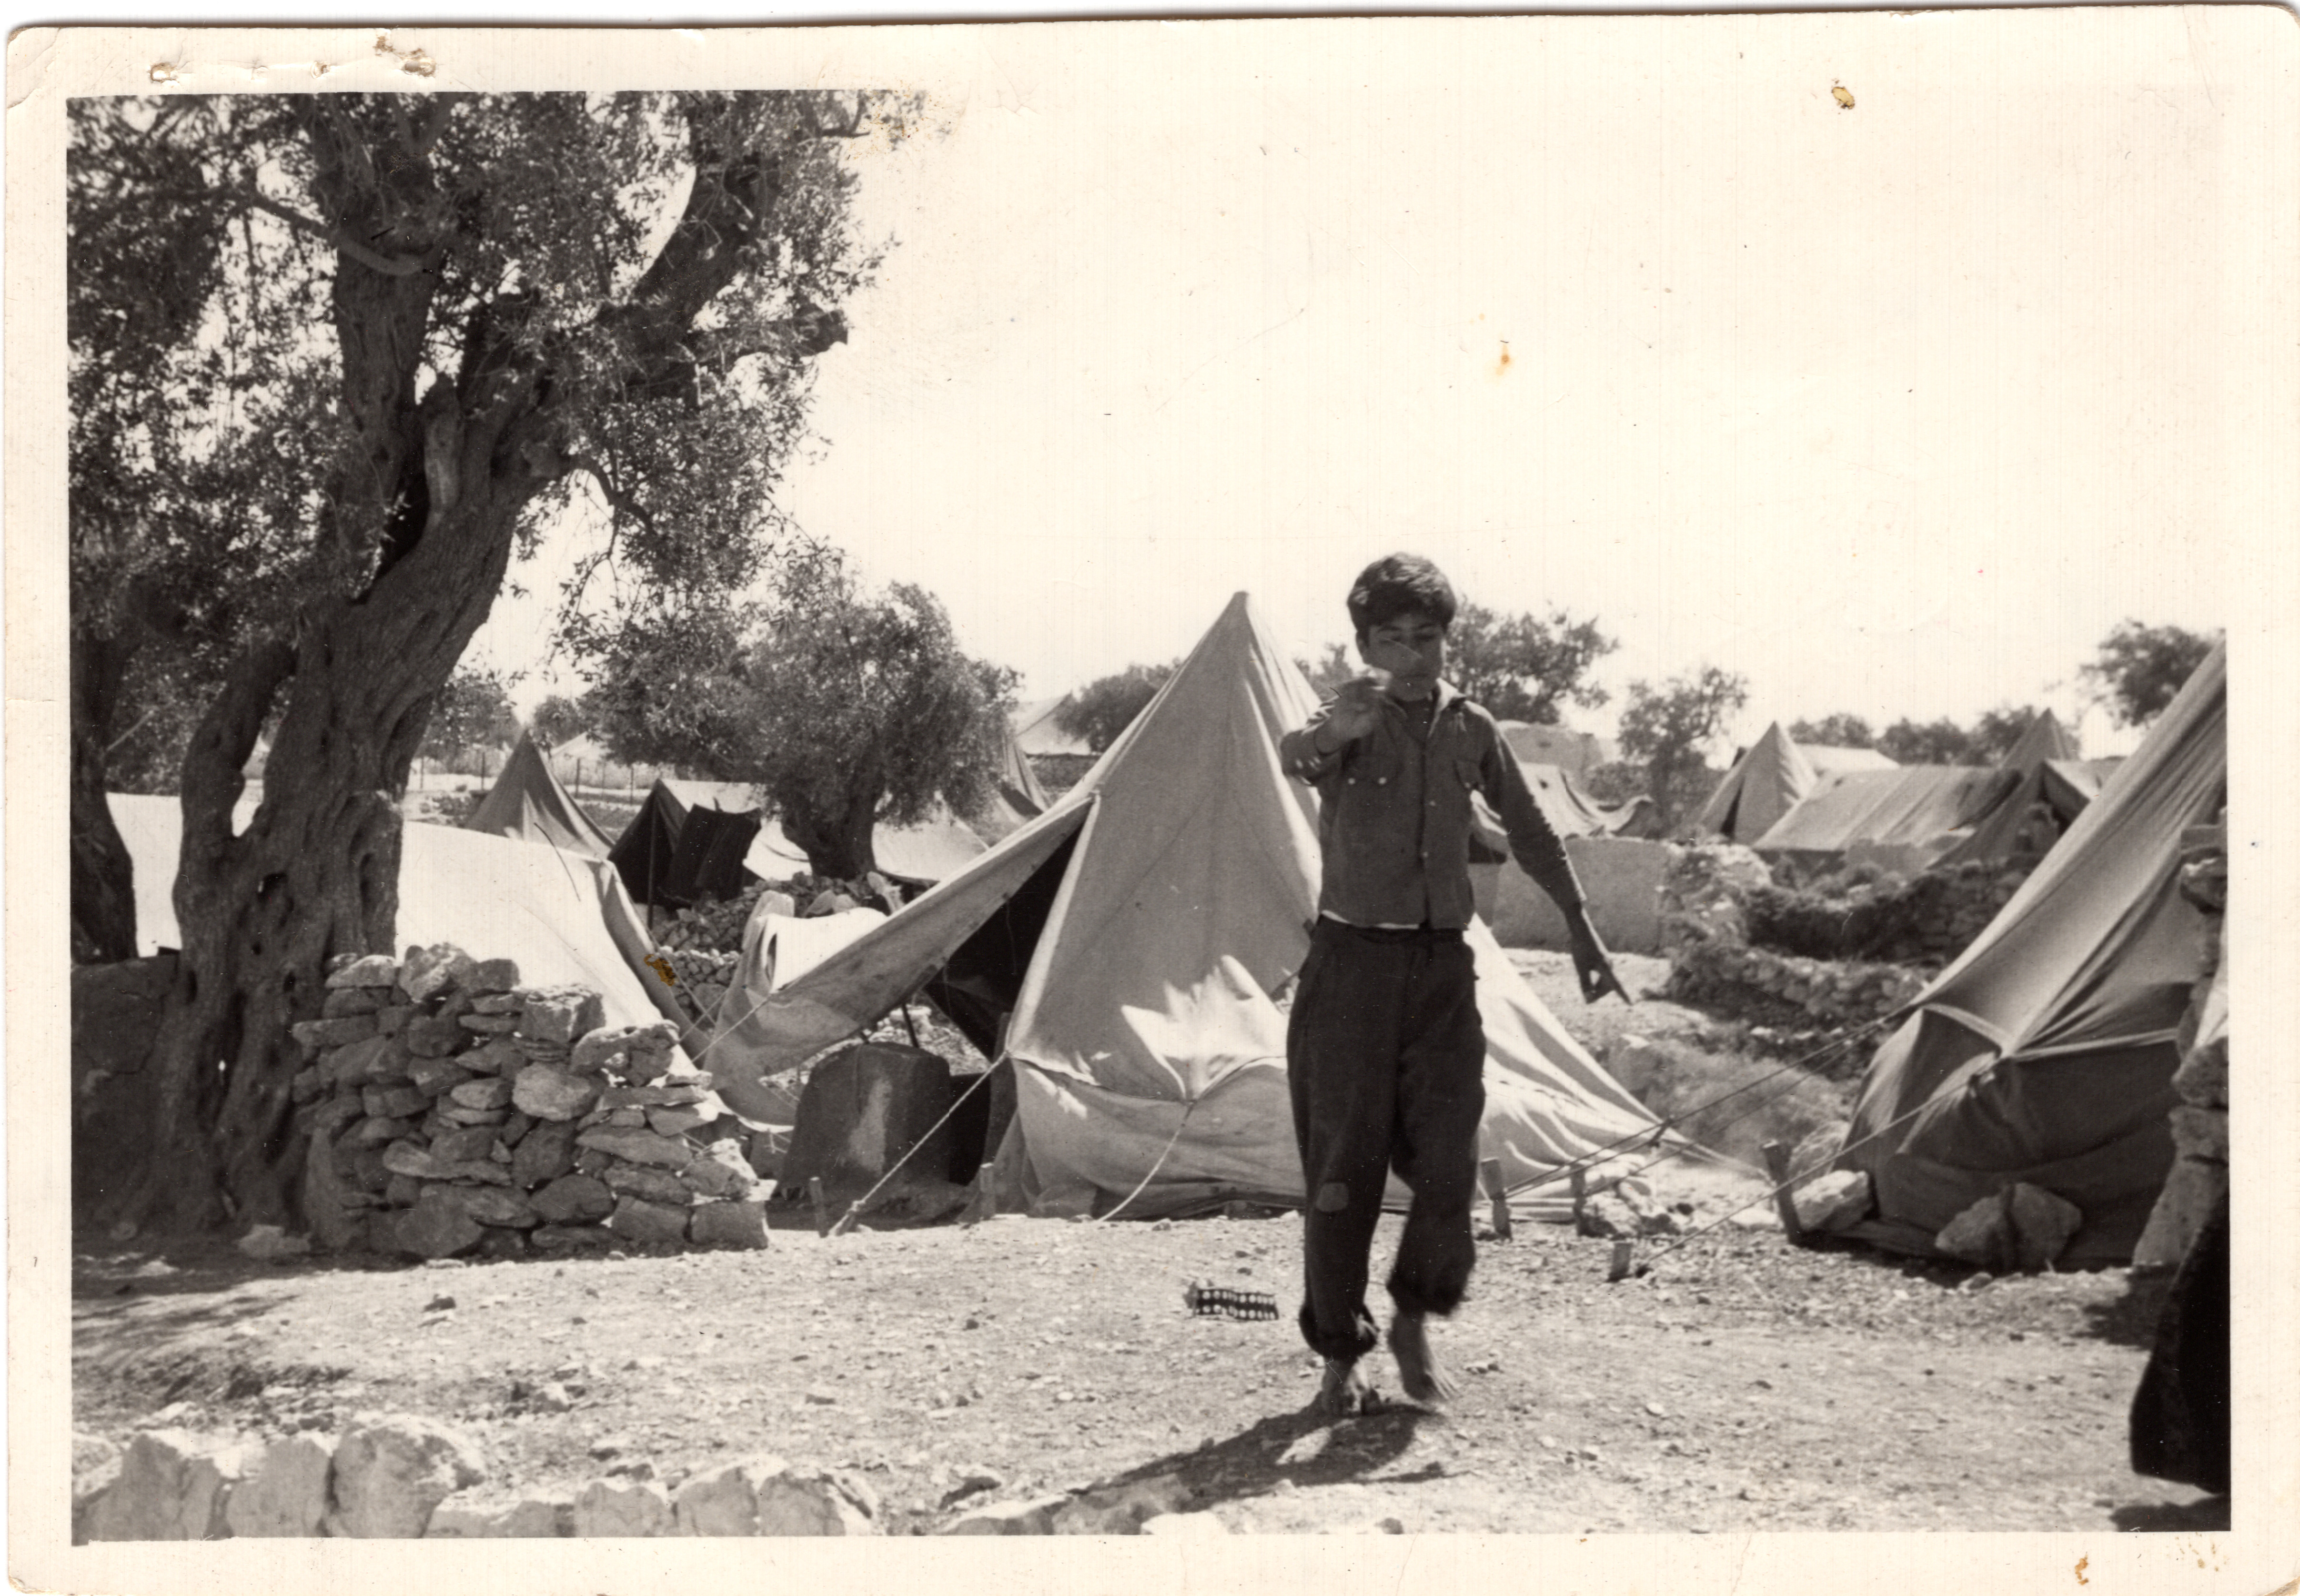 Unknown, “Arab Refugee Camp,” Moise A. Khayrallah Center for Lebanese Diaspora Studies Archive, accessed July 18, 2023, https://lebanesestudies.omeka.chass.ncsu.edu/items/show/13445.